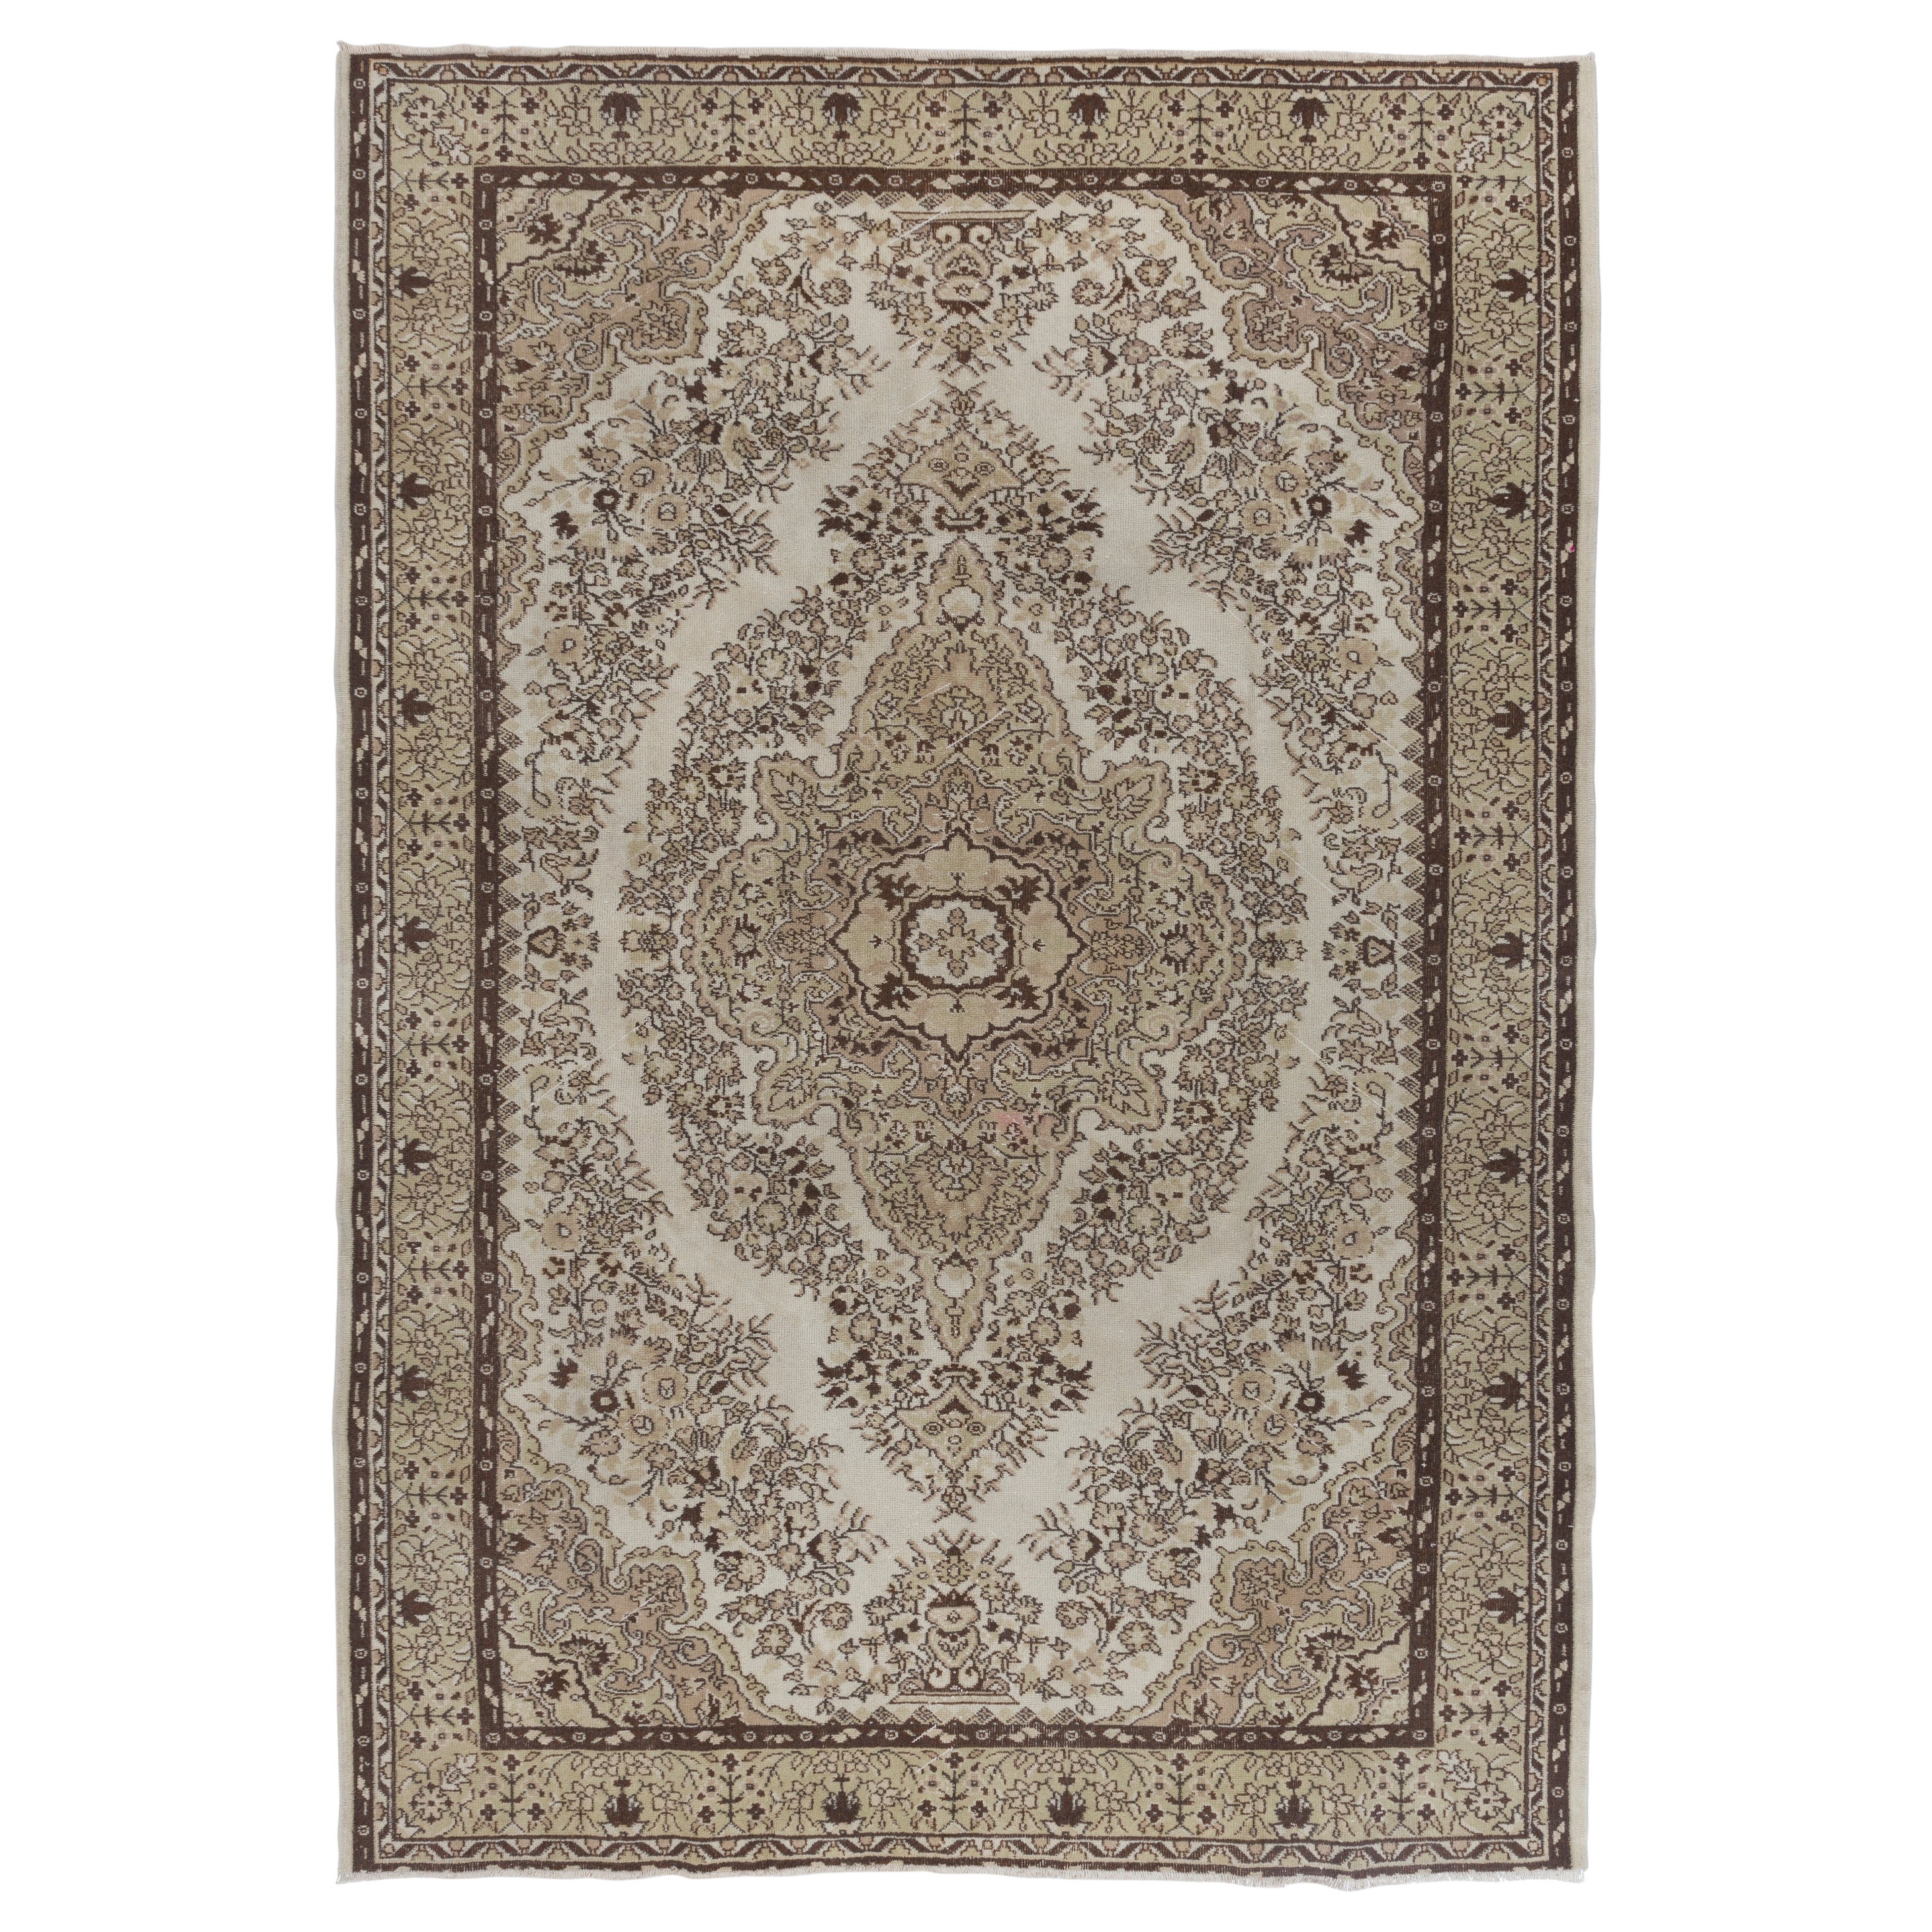 7.3x10.5 Ft Handmade Vintage Floral Turkish Wool Area Rug in Neutral Tones For Sale